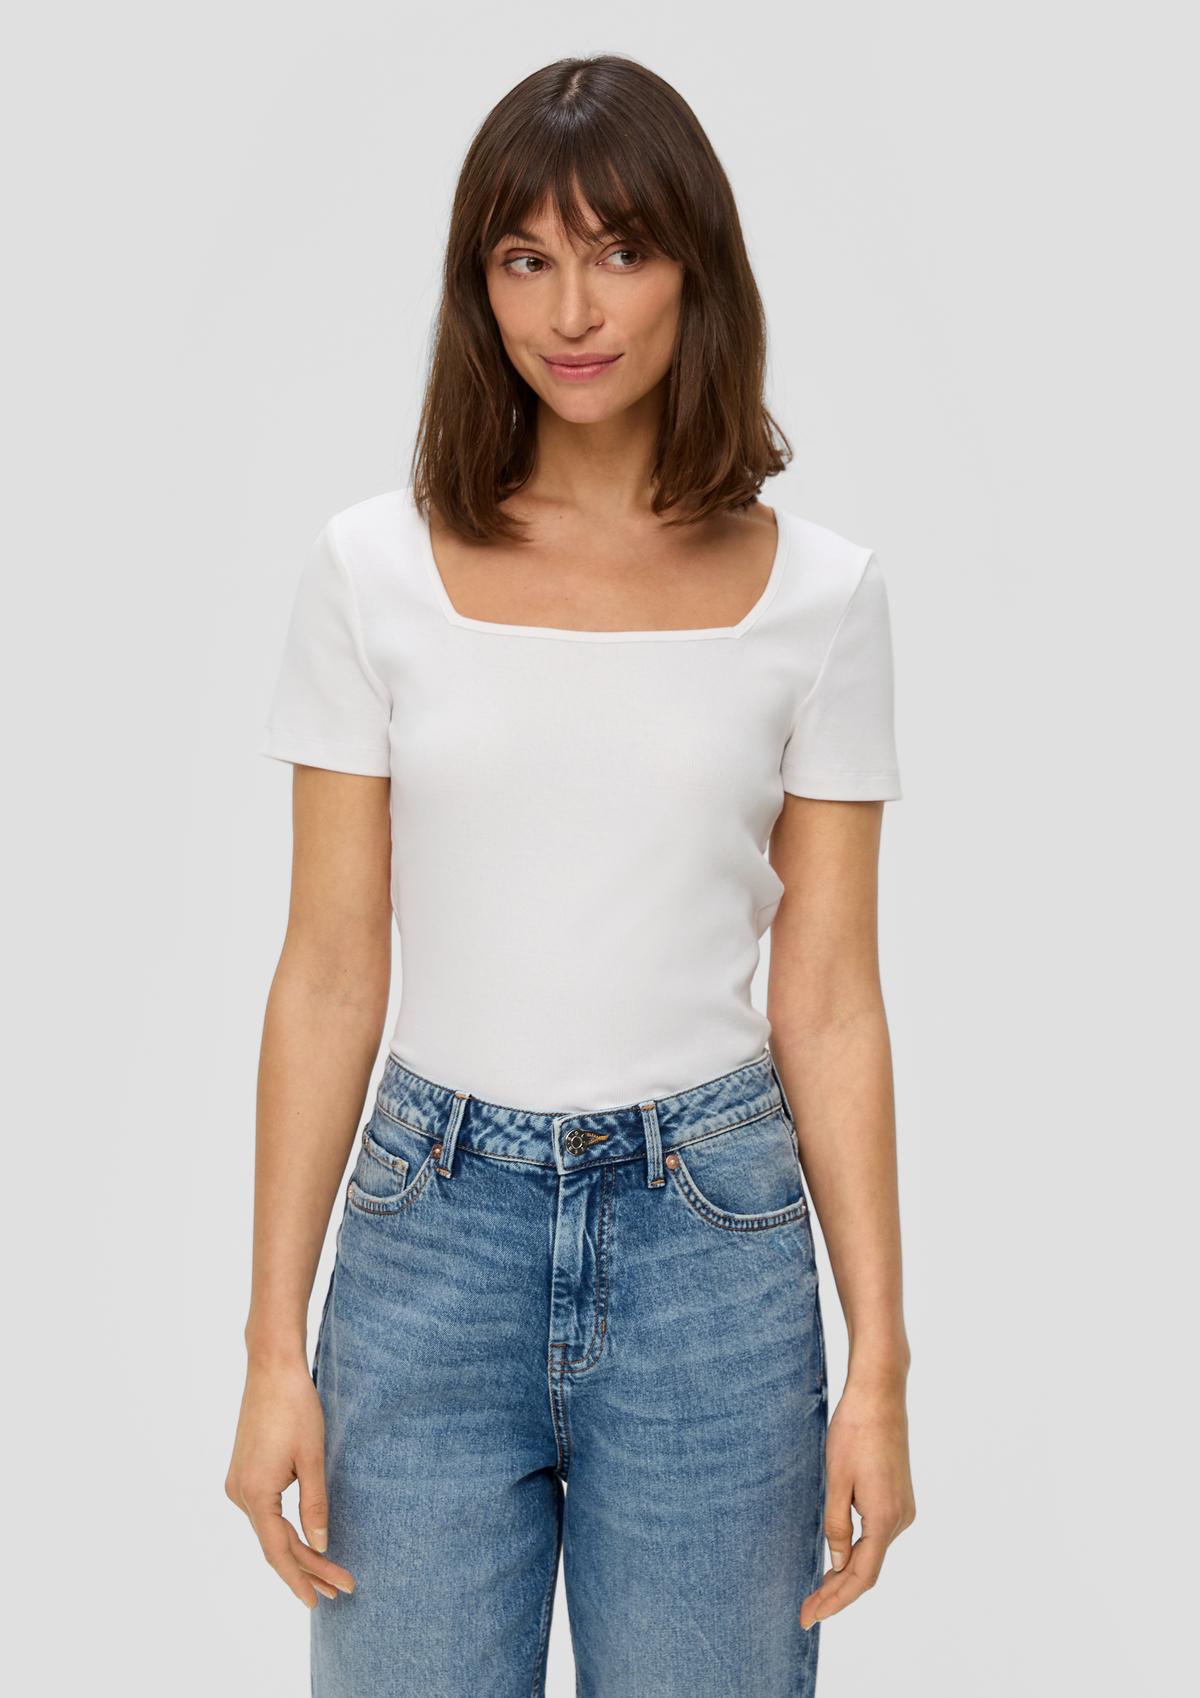 Ribbed top with a square neckline